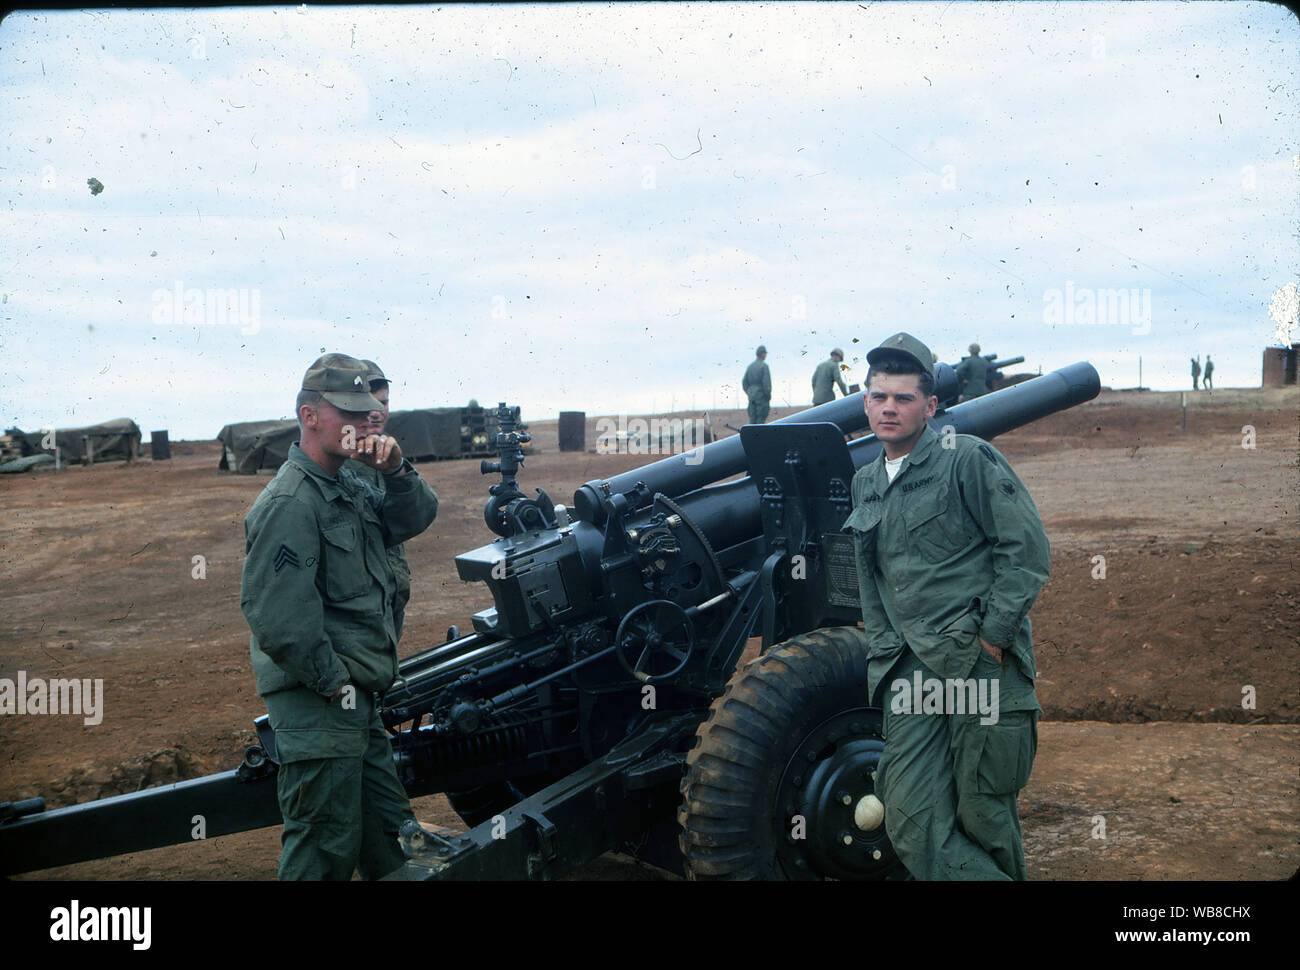 US Army servicemen stand next to a Howitzer artillery gun at a base during the Vietnam War in February of 1967. Stock Photo